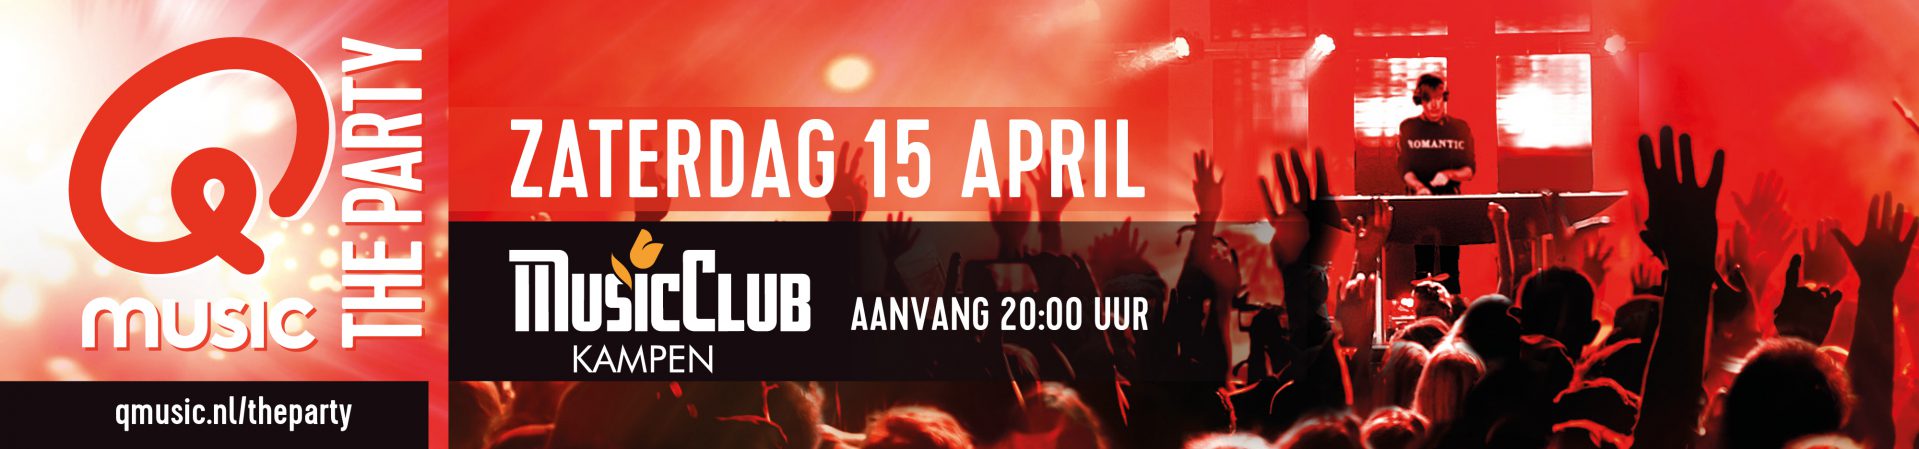 Music Club Kampen - Q Music The Party